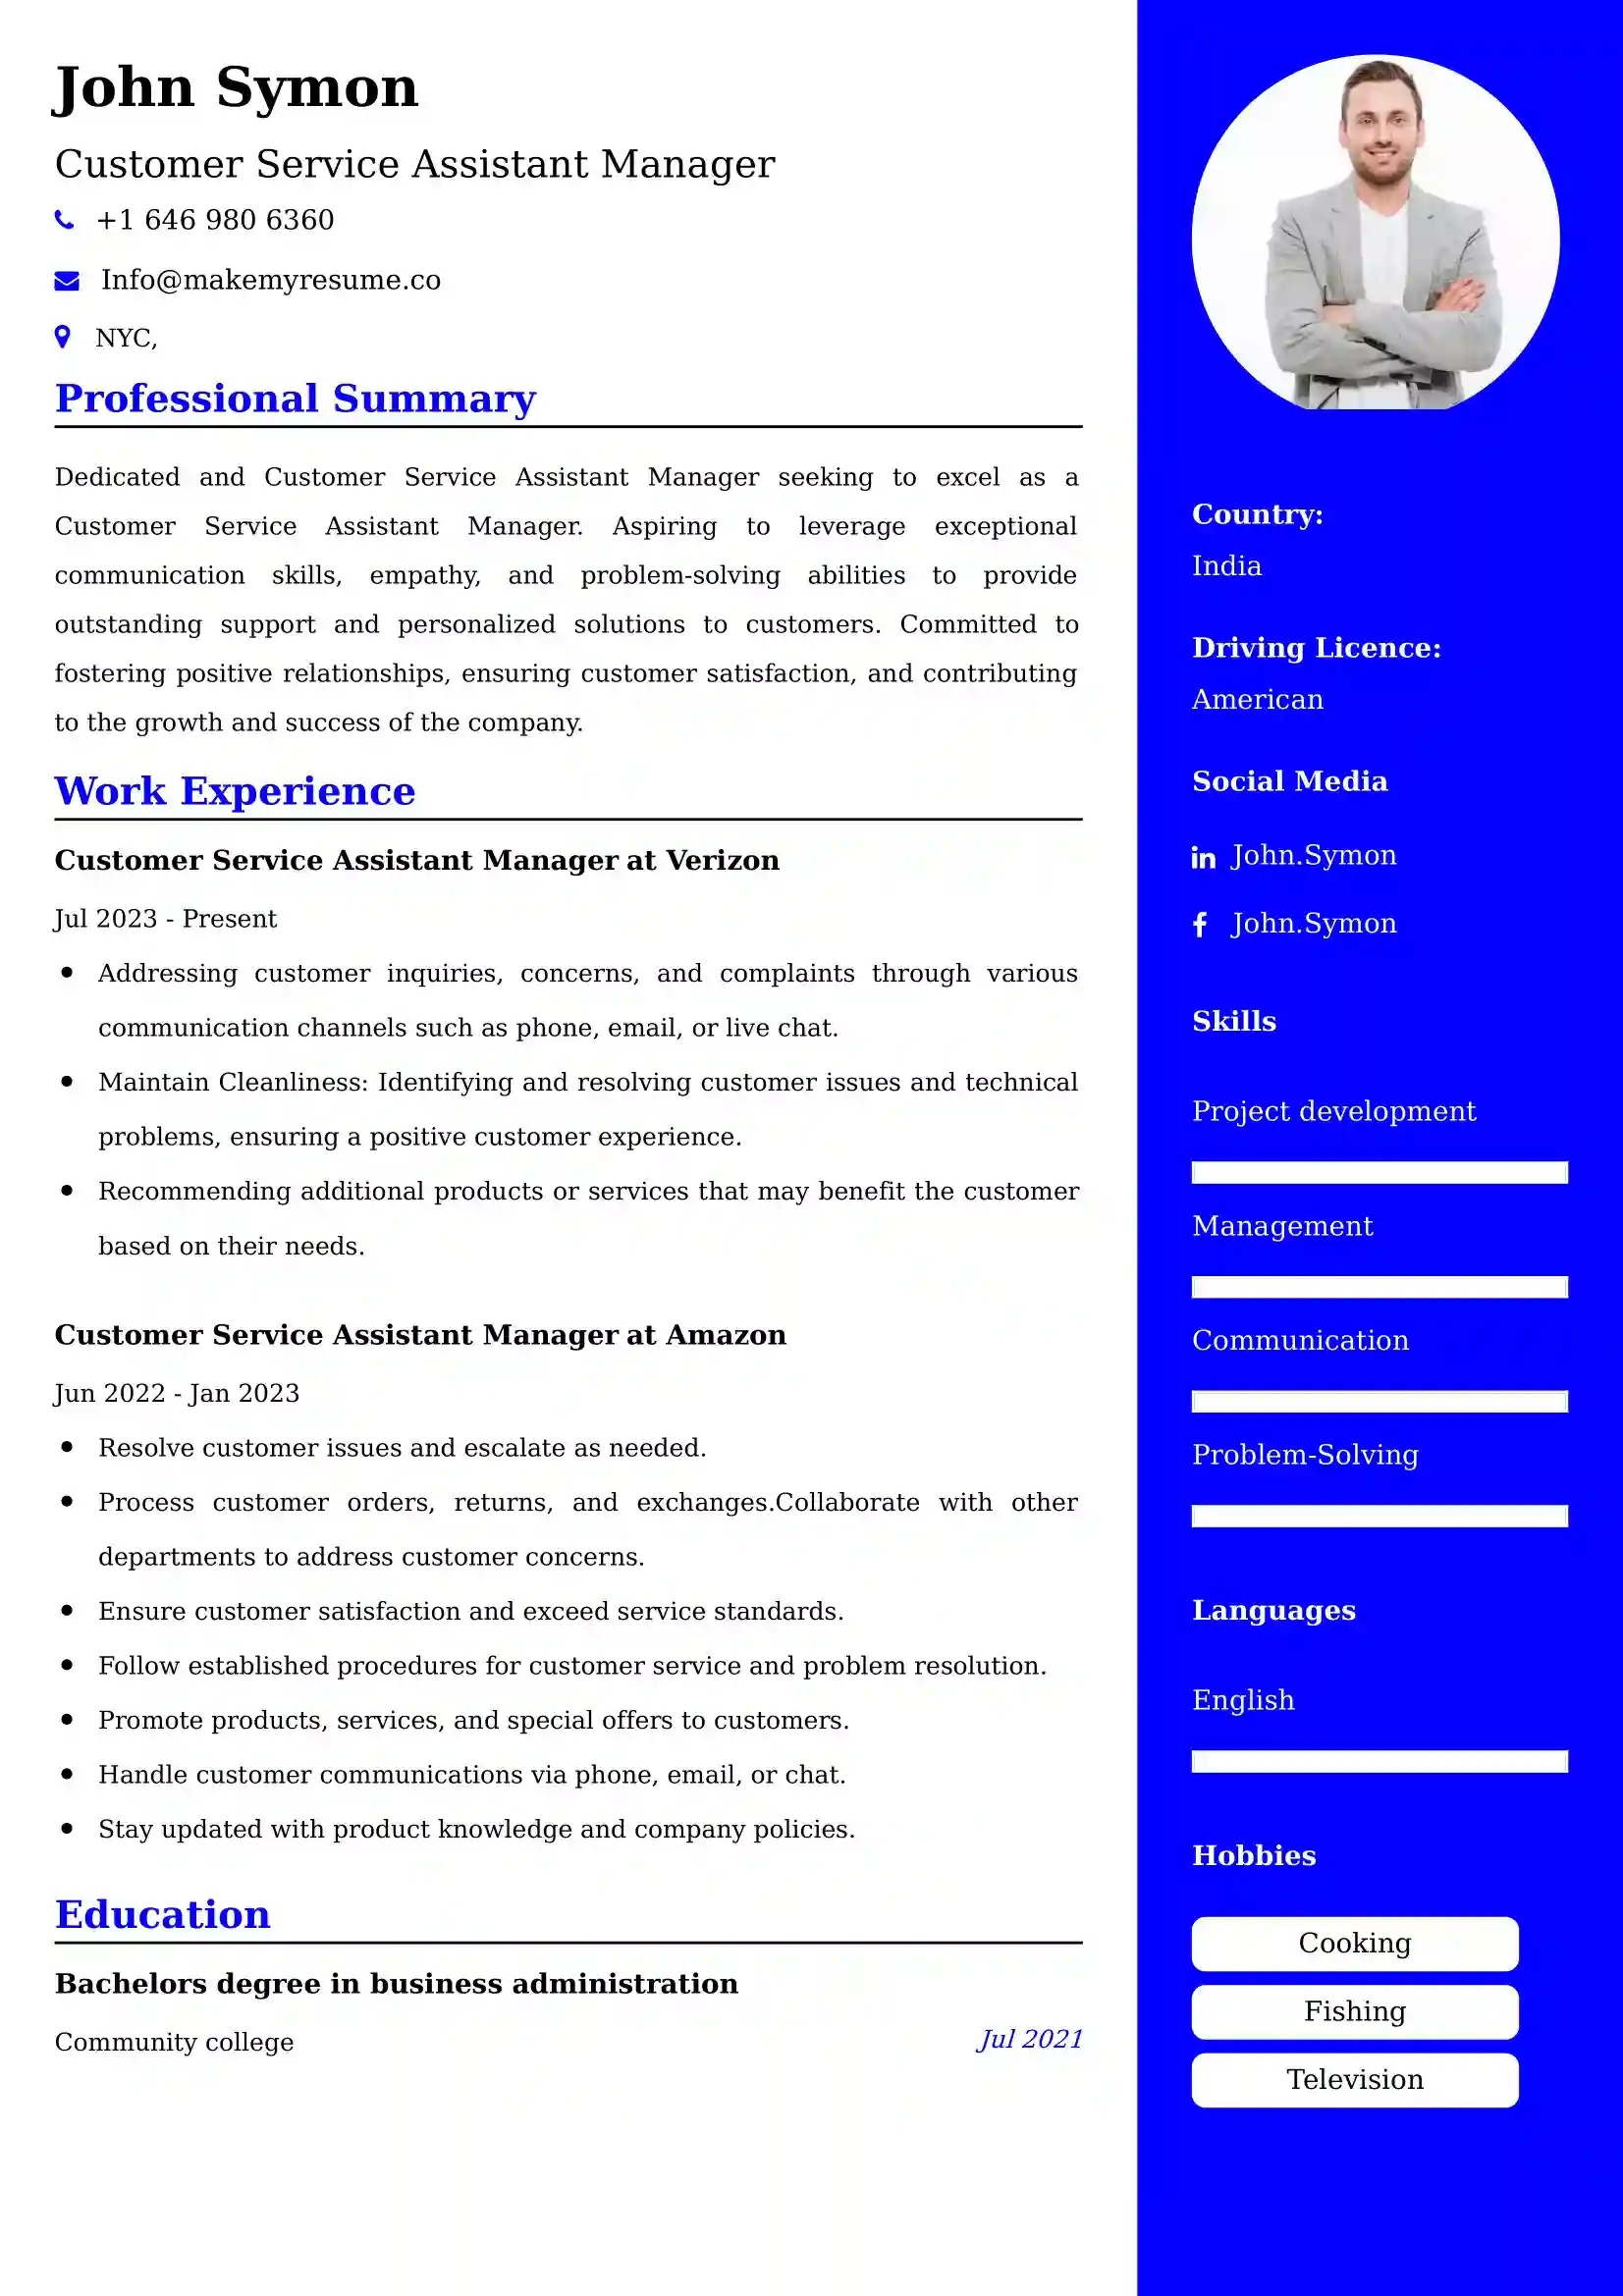 Customer Service Assistant Manager Resume Examples - Brazilian Format, Latest Template